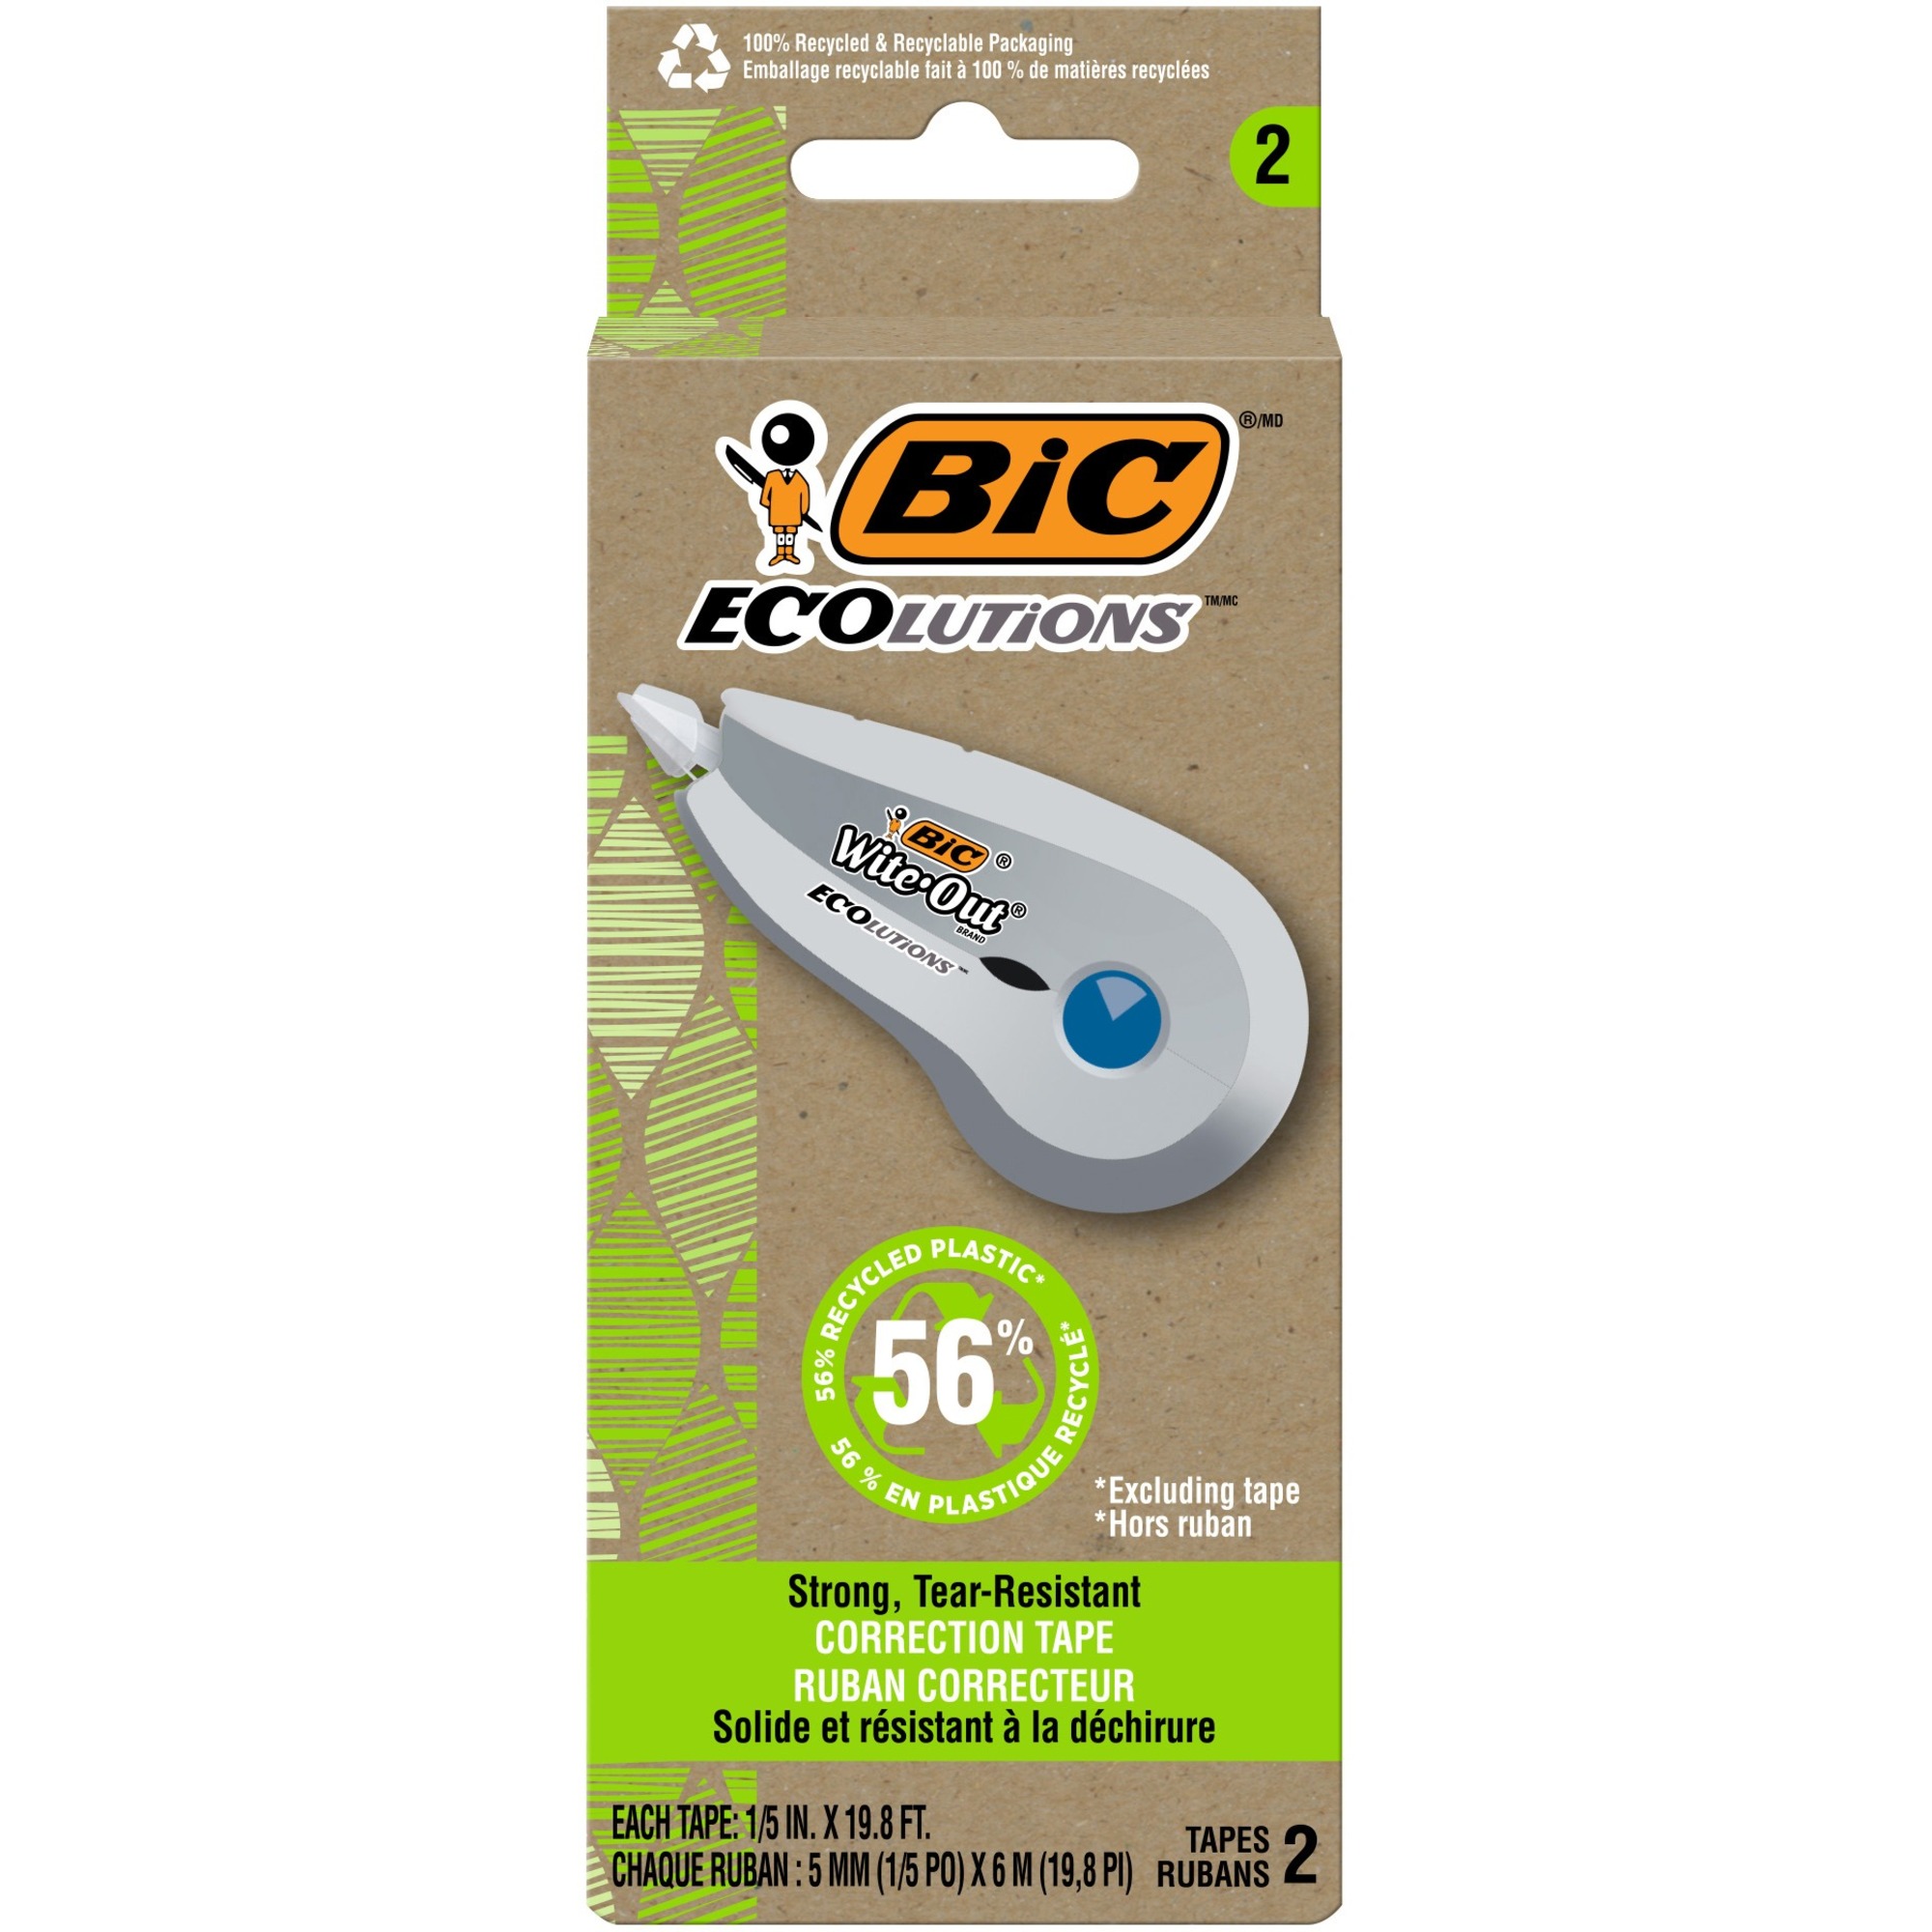 BIC Wite-Out EZ Correct Correction Tape - White - Tear-Resistant